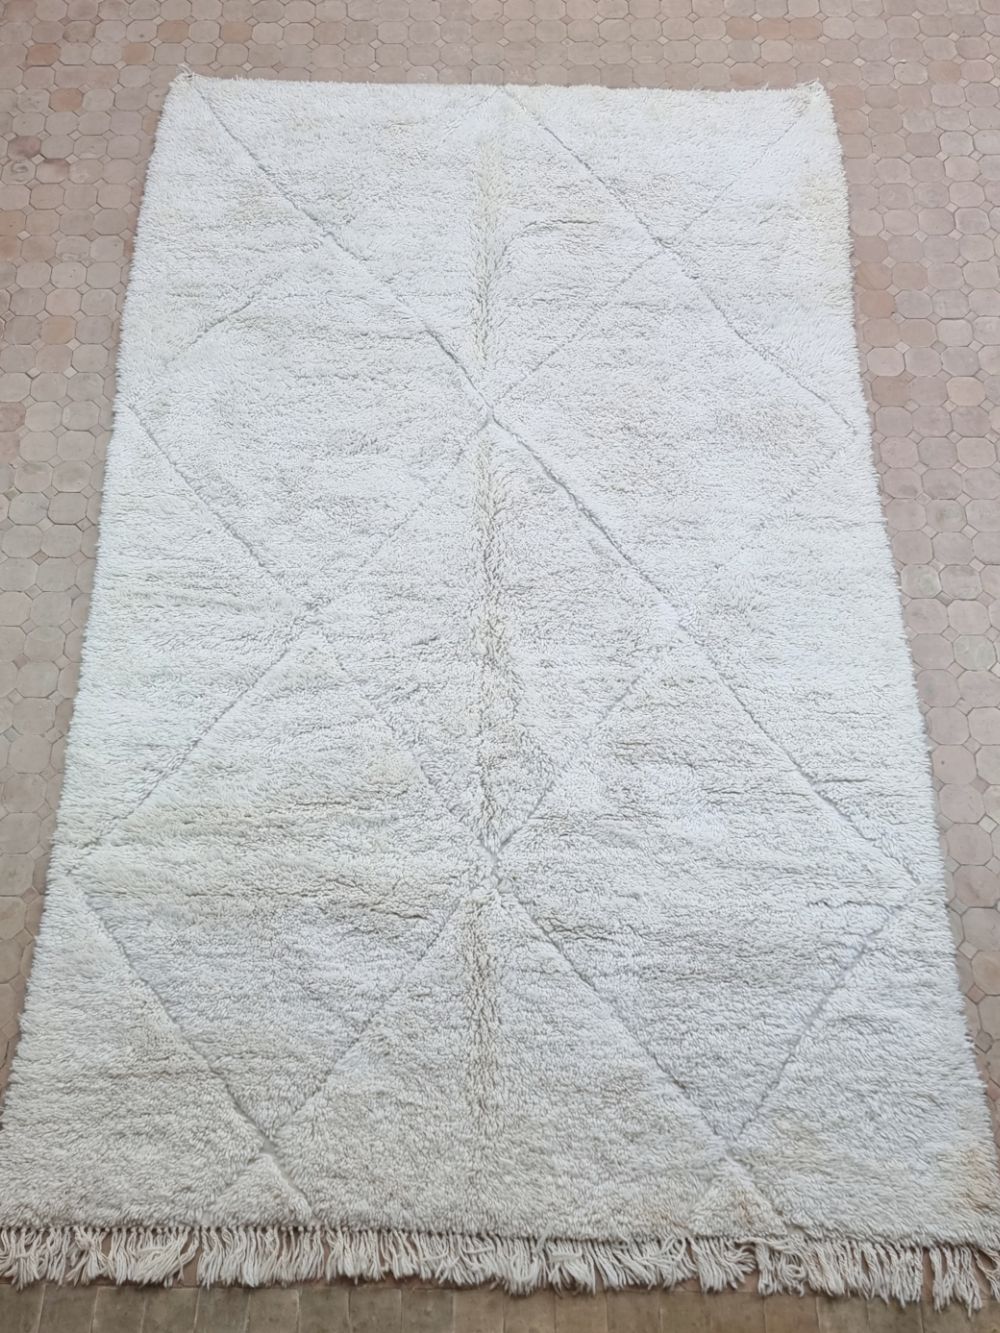 Moroccan All White Rug 325x200cm